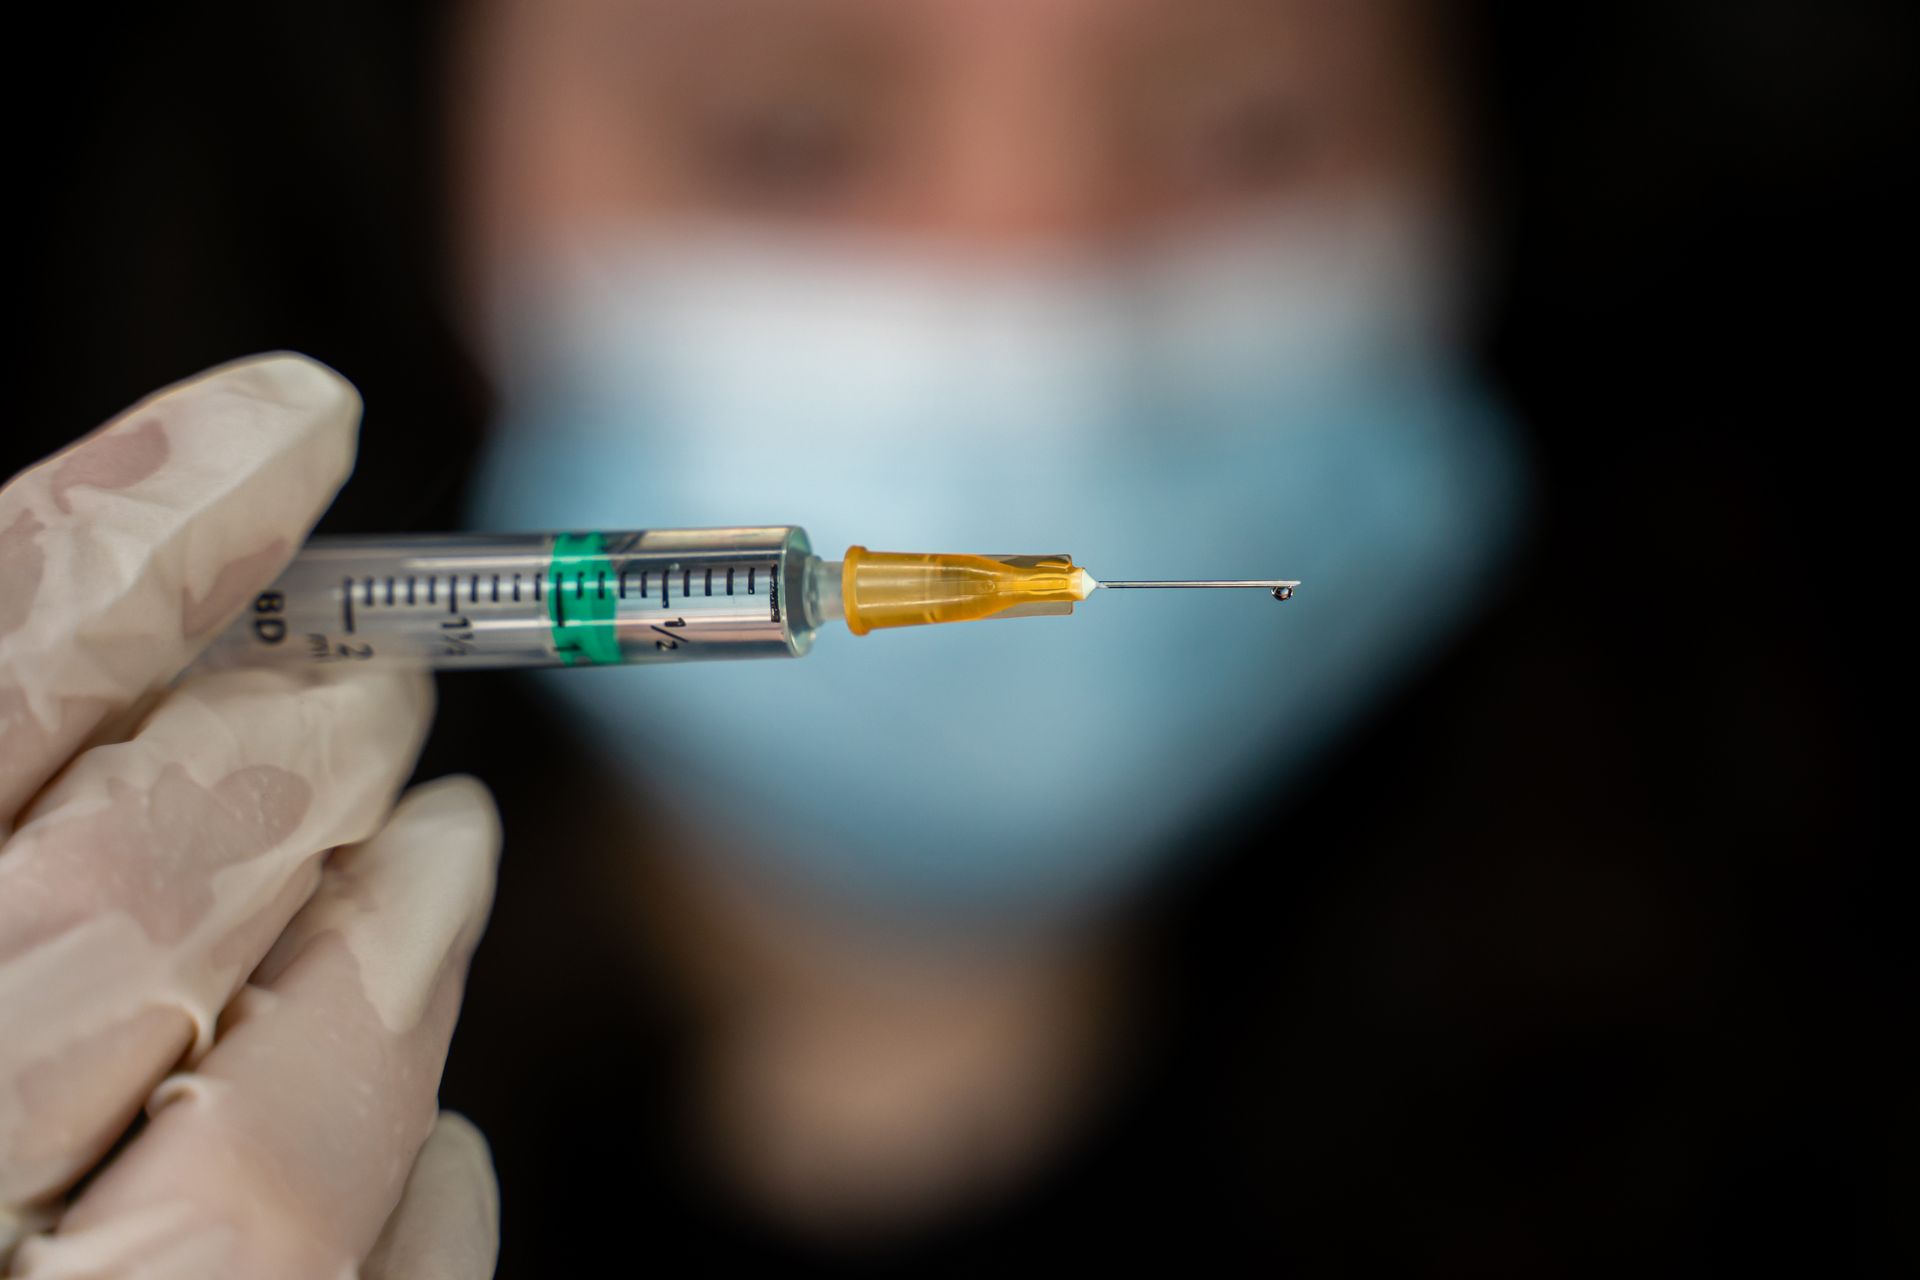 German man was vaccinated more than 200 times against Covid